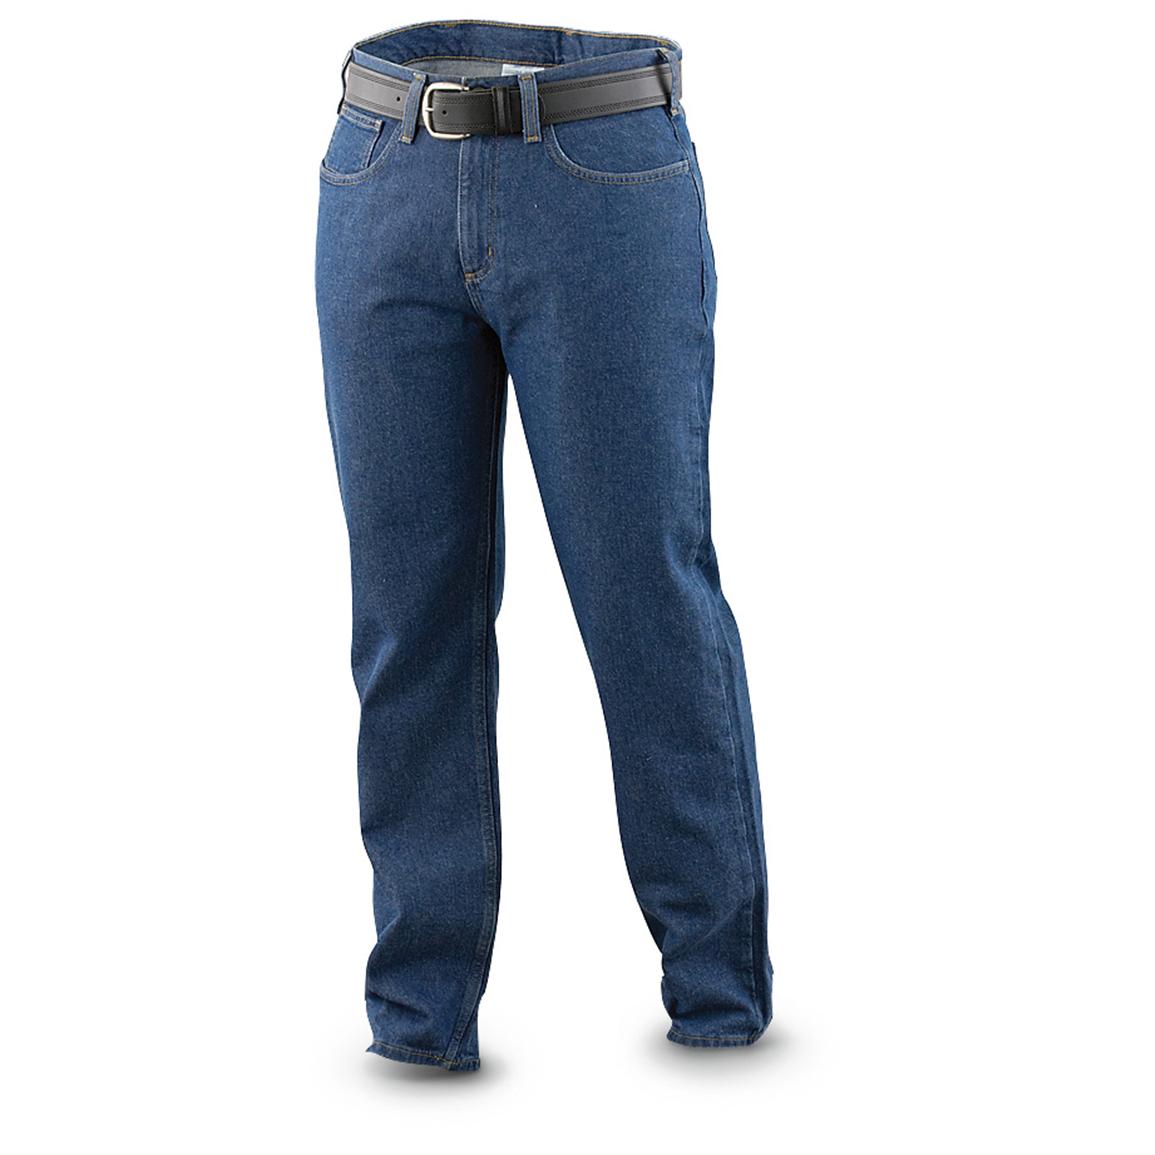 Carhartt Men's Relaxed-Fit Straight Leg Work Jeans - 282830, Jeans ...